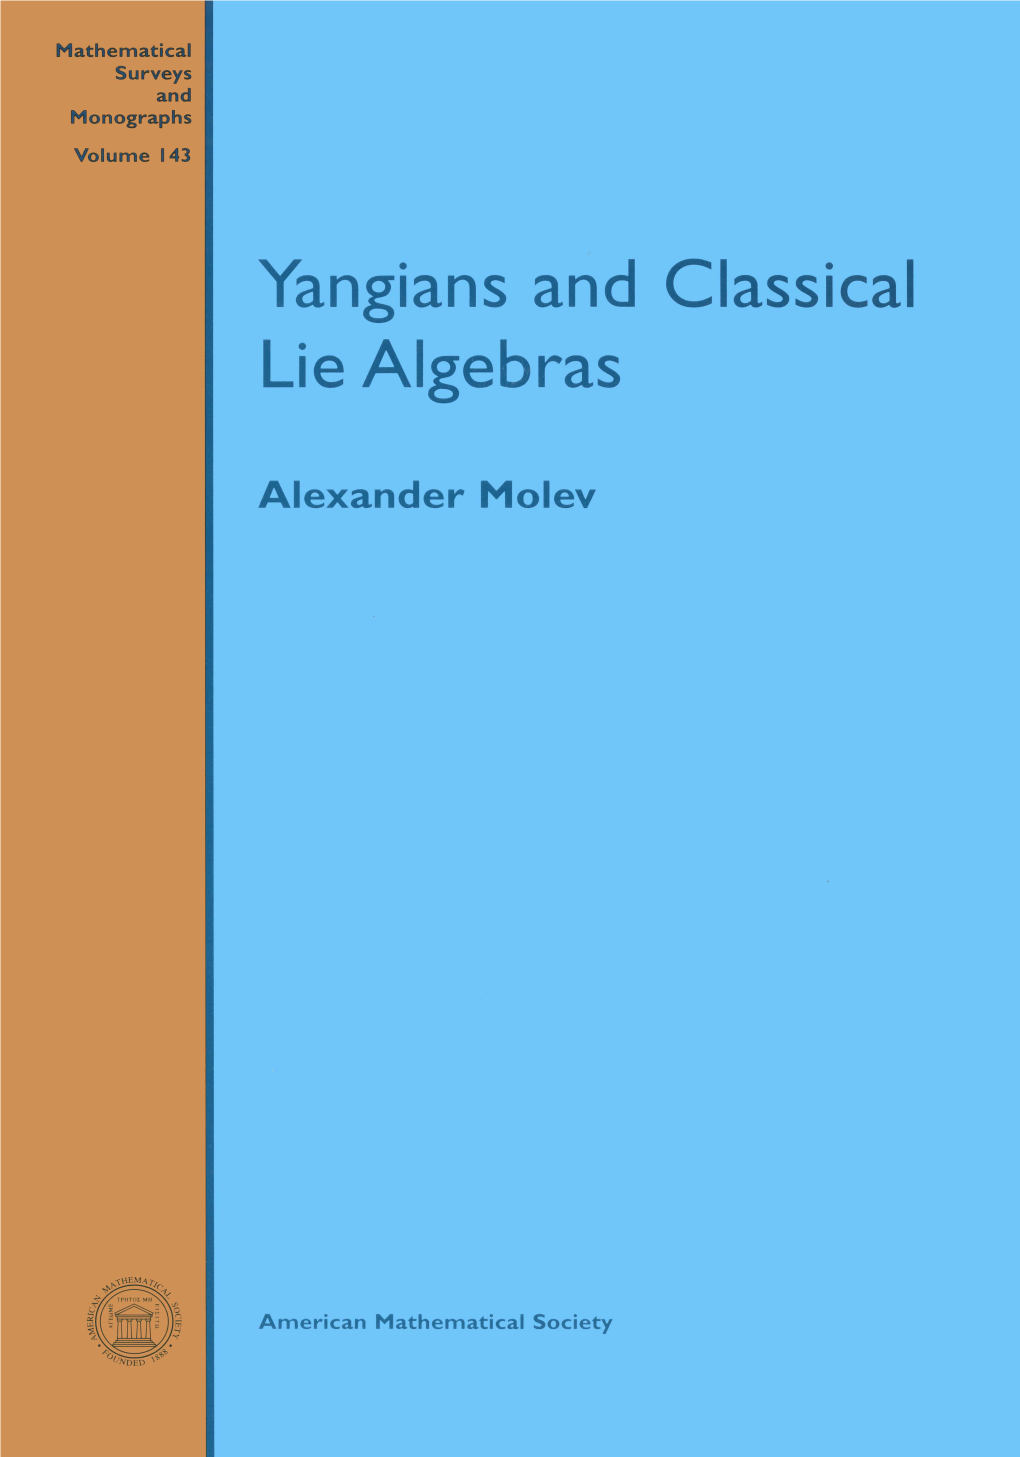 Yangians and Classical Lie Algebras Mathematical Surveys and Monographs Volume 143